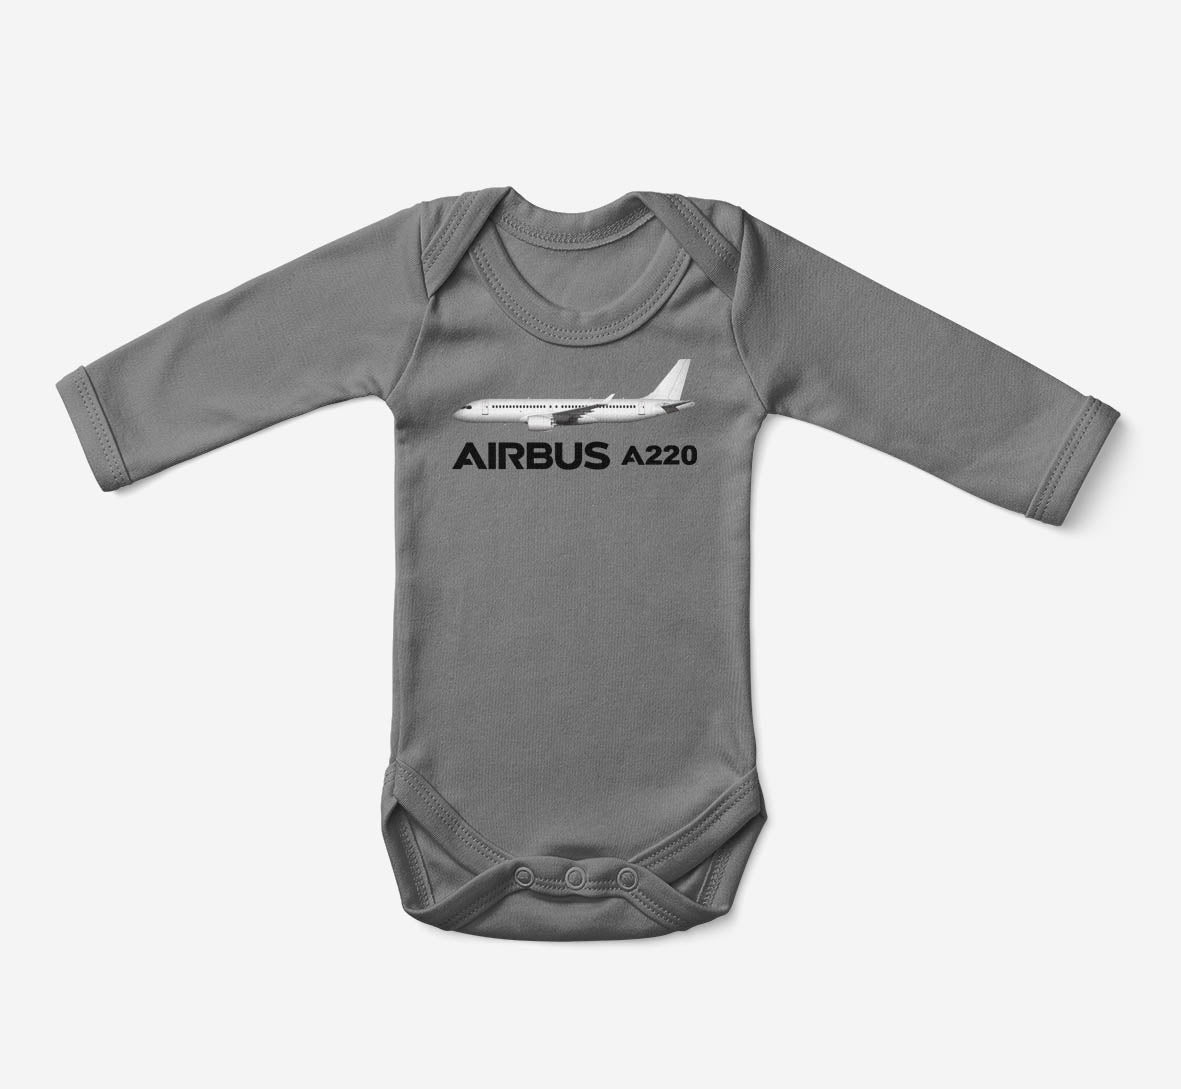 The Airbus A220 Designed Baby Bodysuits